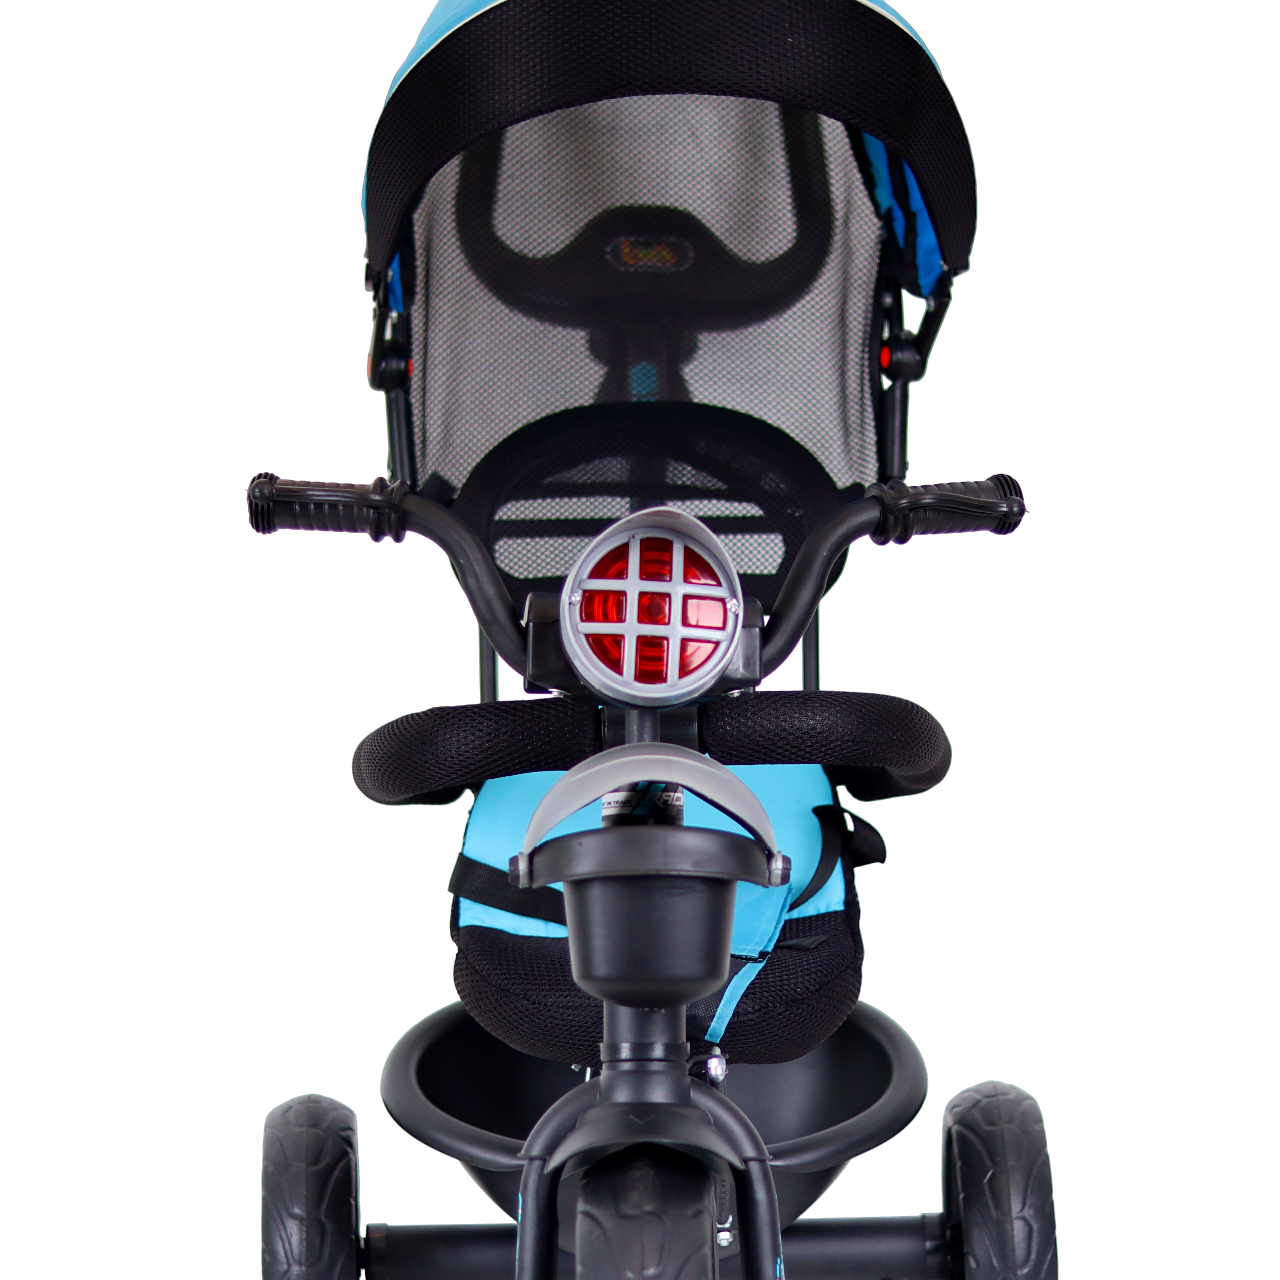 Luusa R9 Power 500 Tricycle for Kids Safest baby cycle with Hood and Parent Handle-Blue